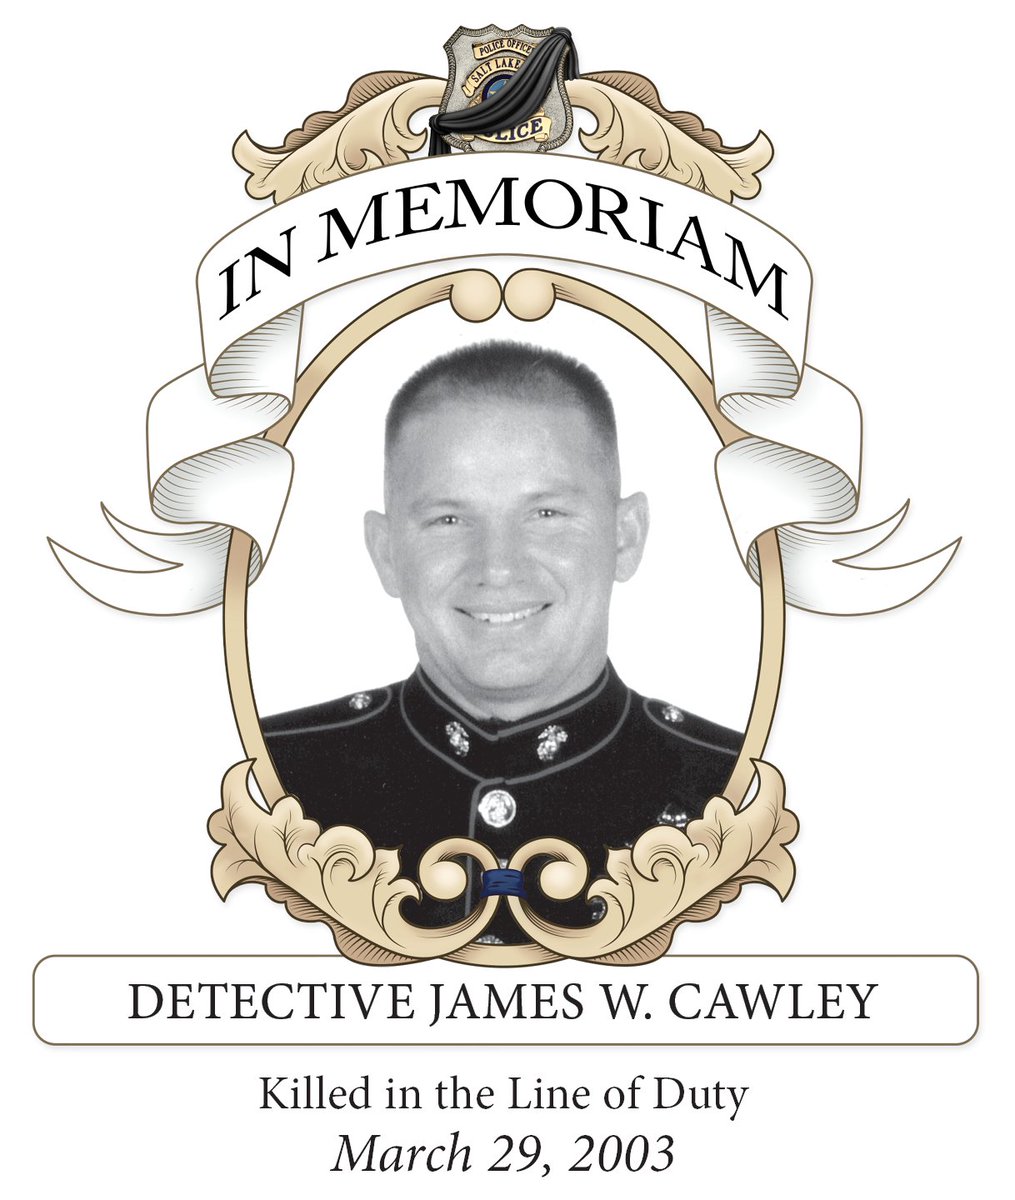 21 years ago, Detective James W. Cawley died while serving our country in Iraq. Whether serving our community as a police officer or a Marine in another country, Cawley was willing to sacrifice his life for others. We will #NeverForget his legacy. #SaltLakeCity #SLCPD #SLC